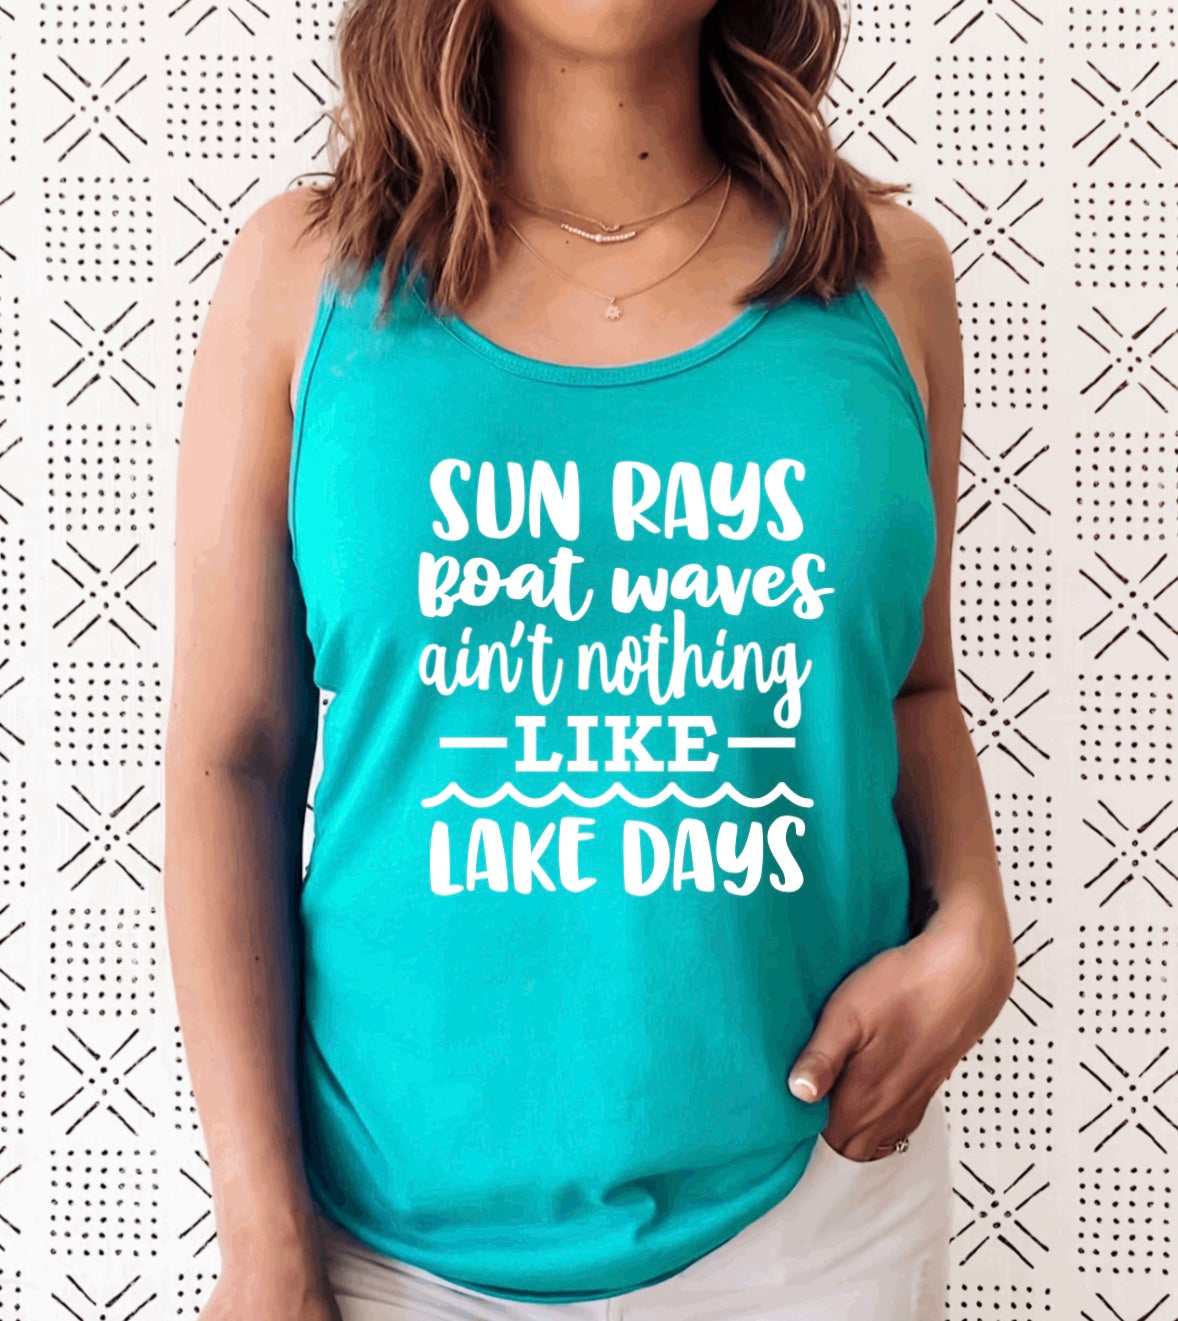 Sun rays boat waves ain’t nothing like lake days racerback tank top 